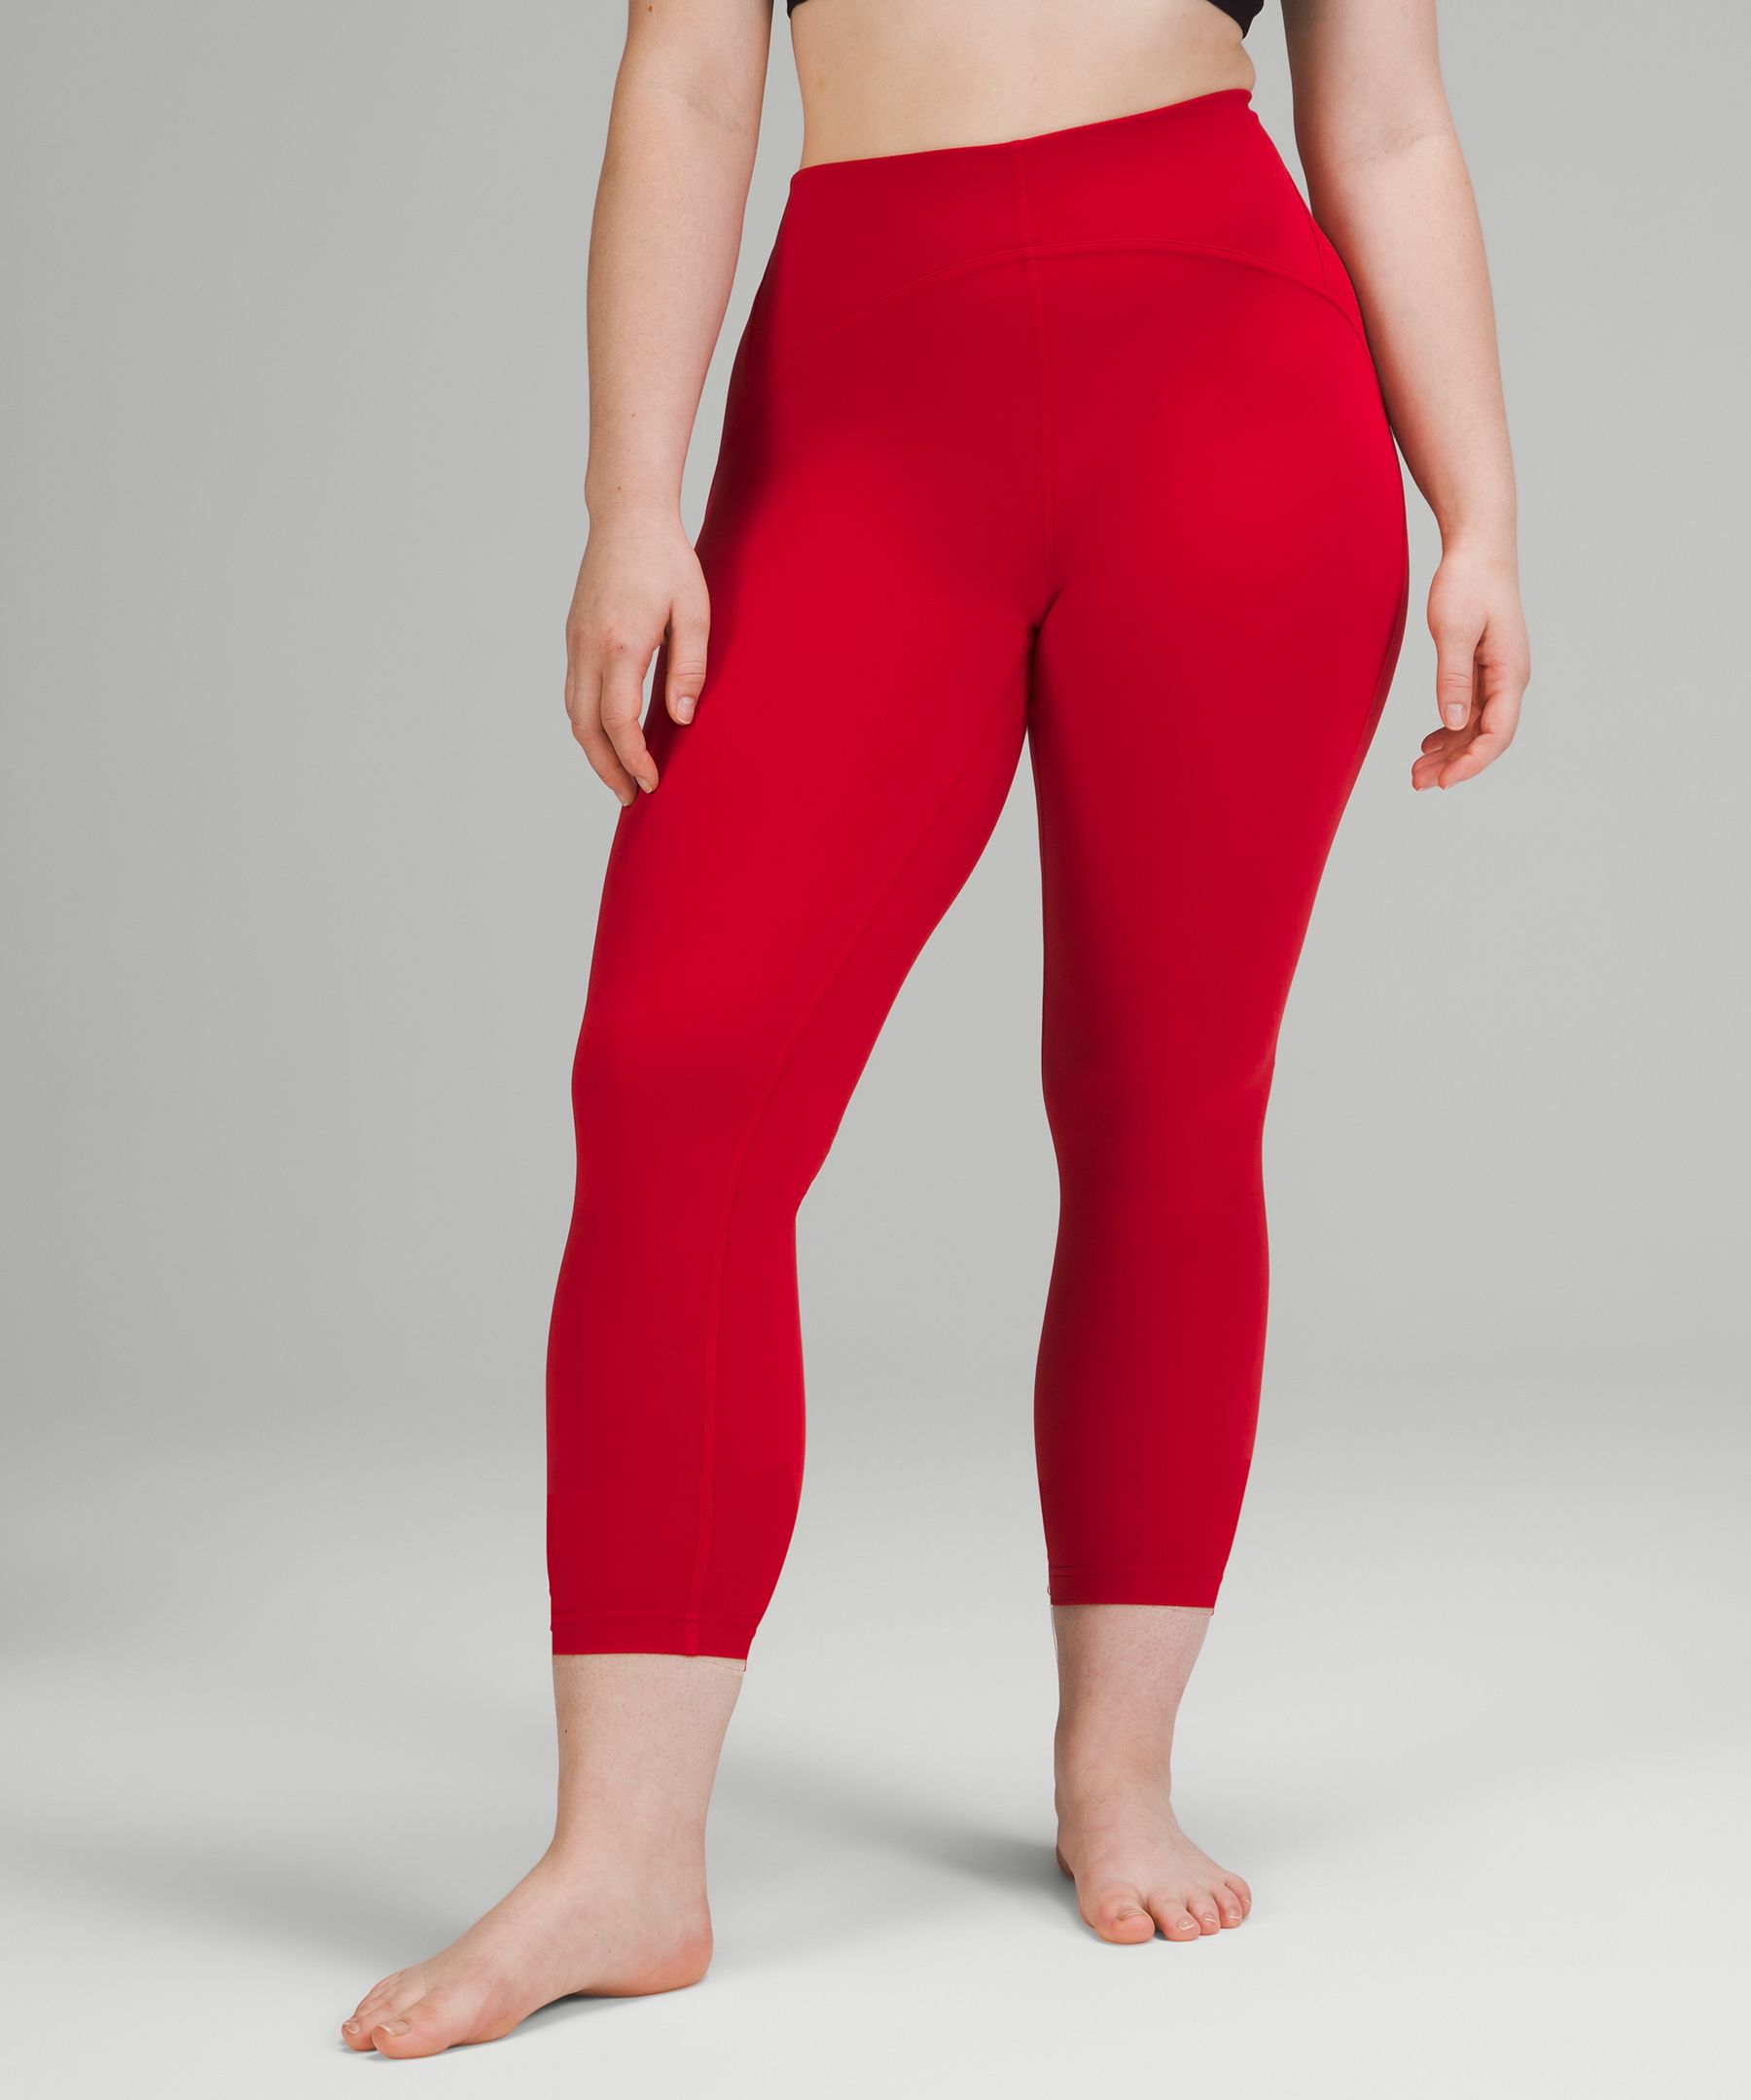 12 Best Lululemon Leggings, According To Reviewers Glamour | lupon.gov.ph